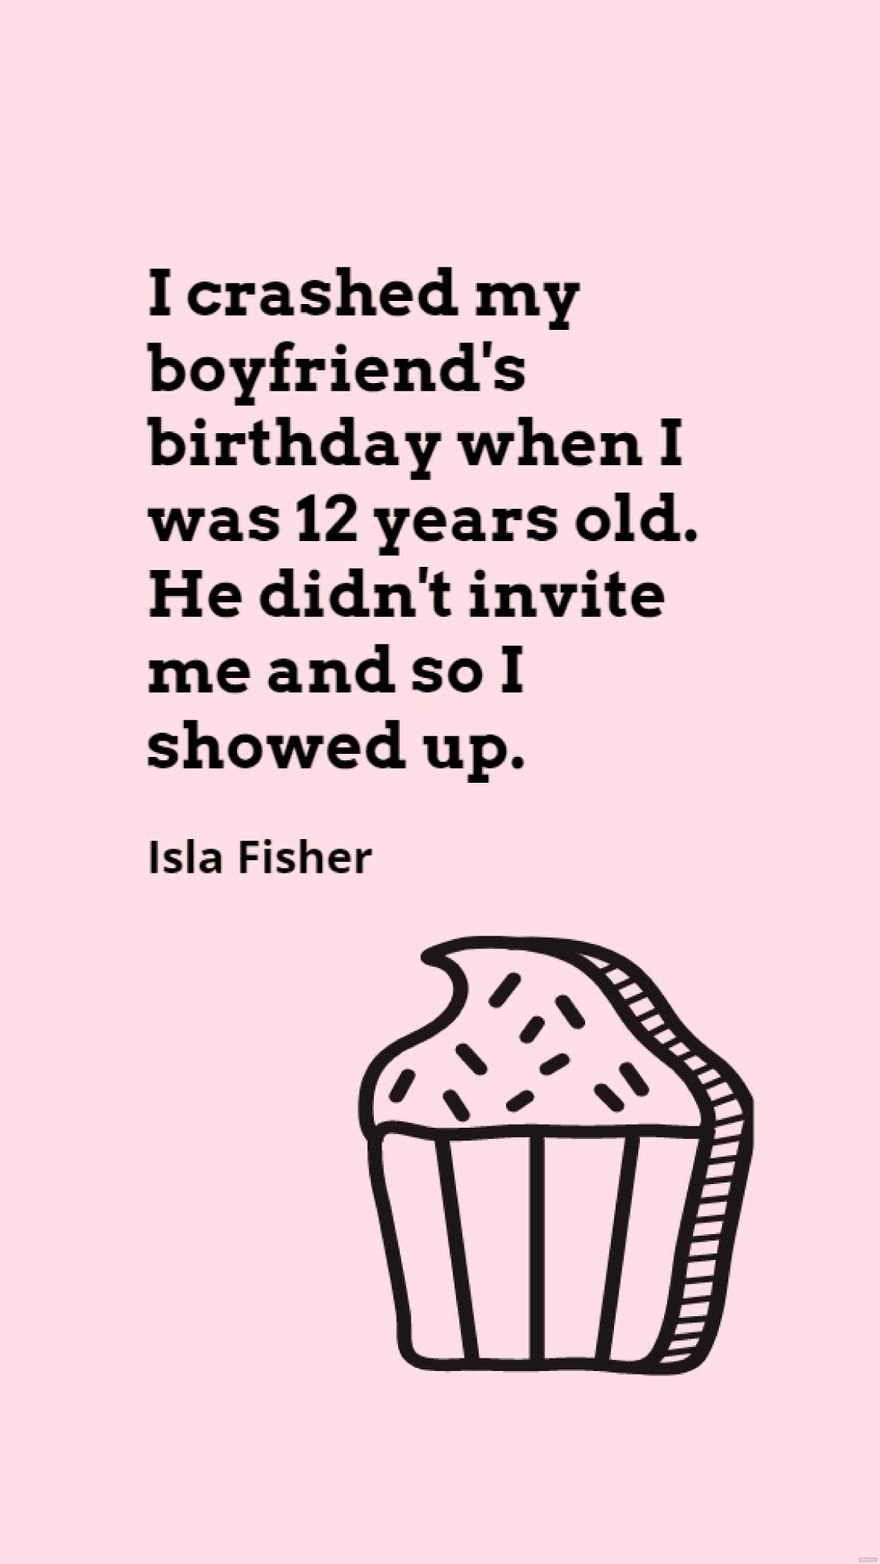 Free Isla Fisher - I crashed my boyfriend's birthday when I was 12 years old. He didn't invite me and so I showed up.